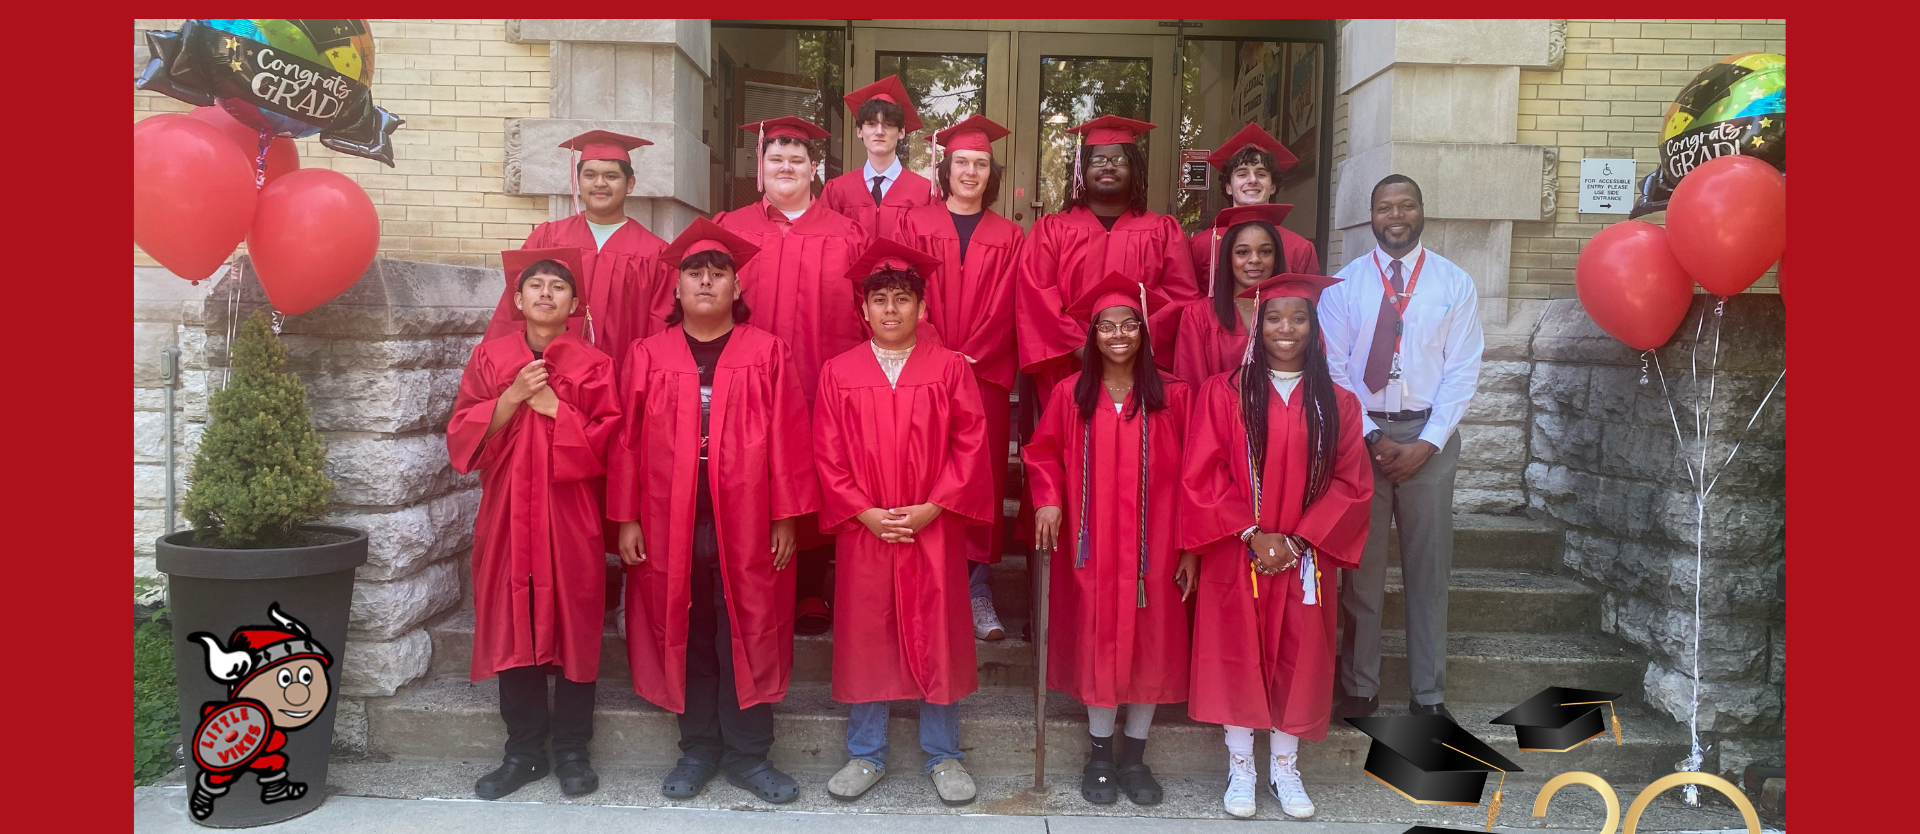 Graduation walks at each elementary, class of 2024 students in cap and gown from Glendale Elementary